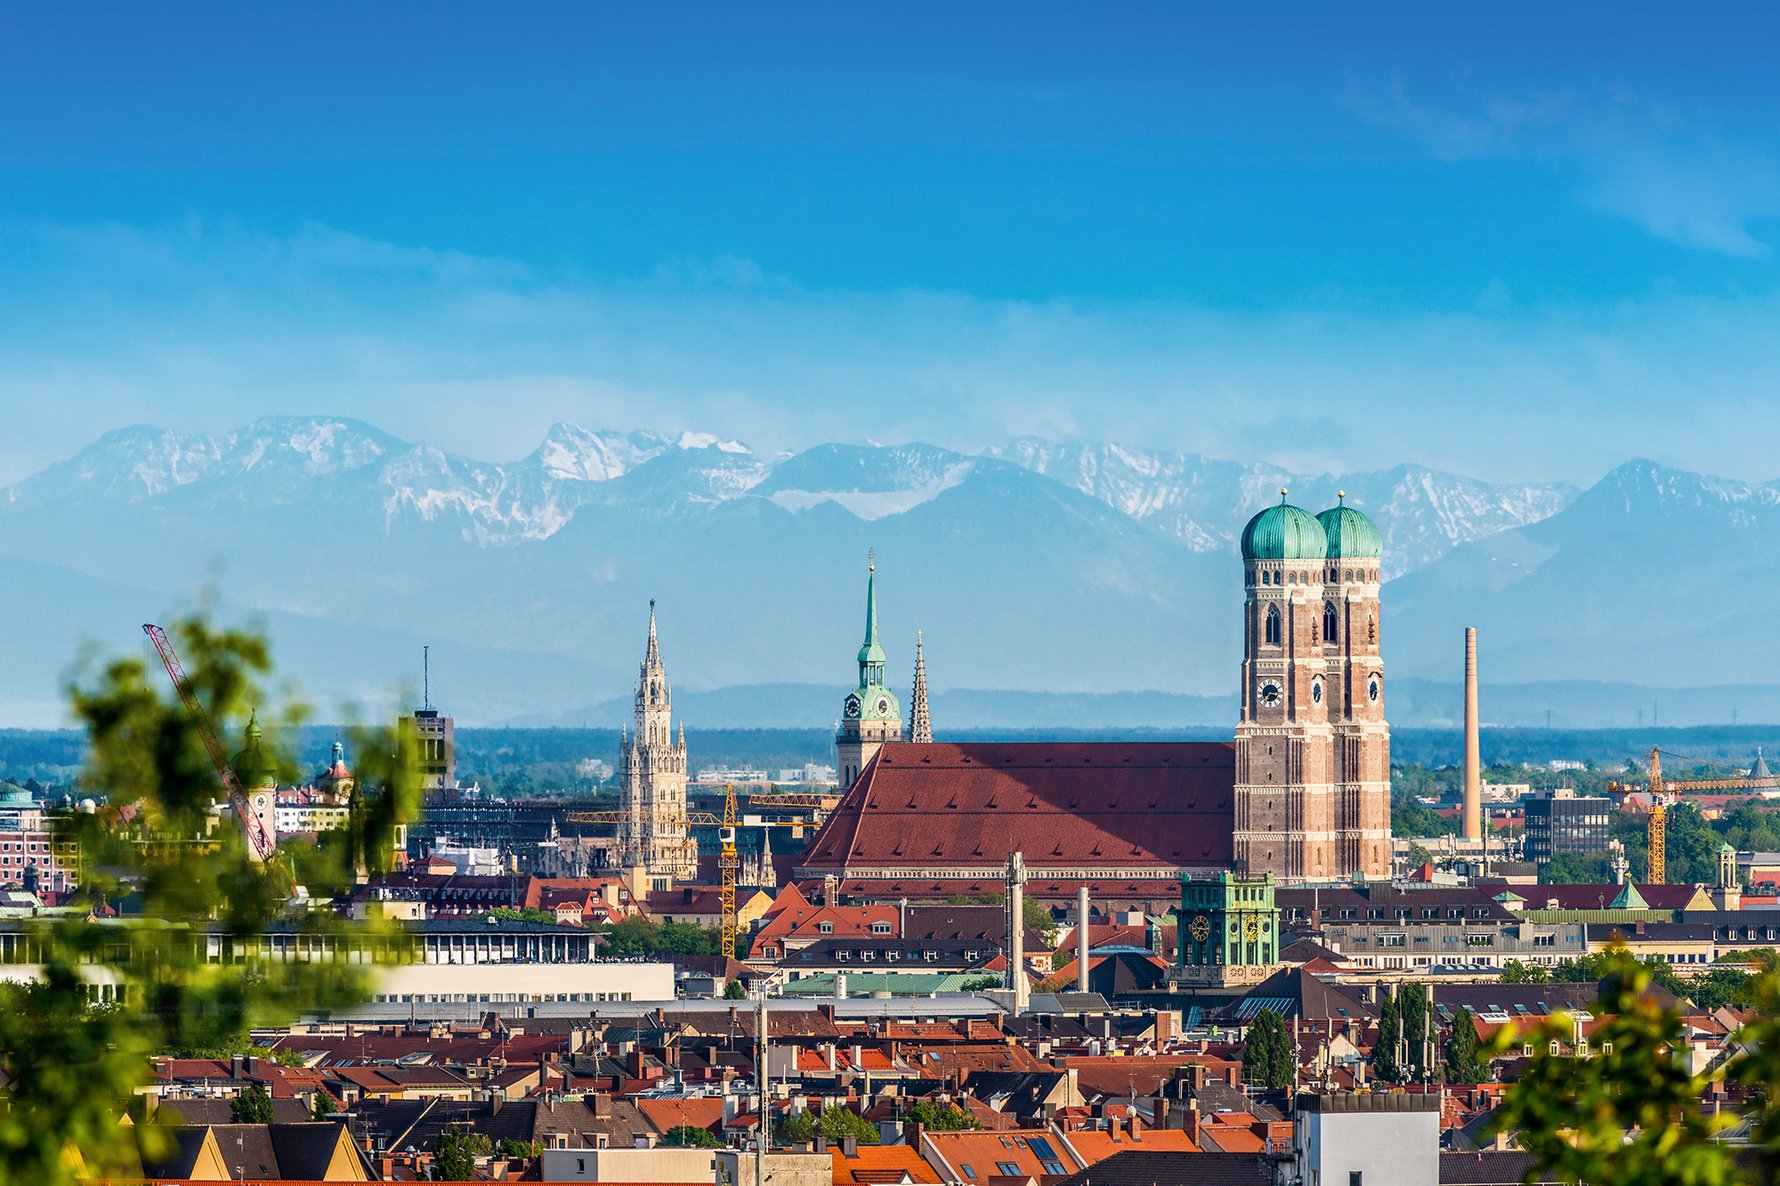 Top 5 Buildings to See in Munich